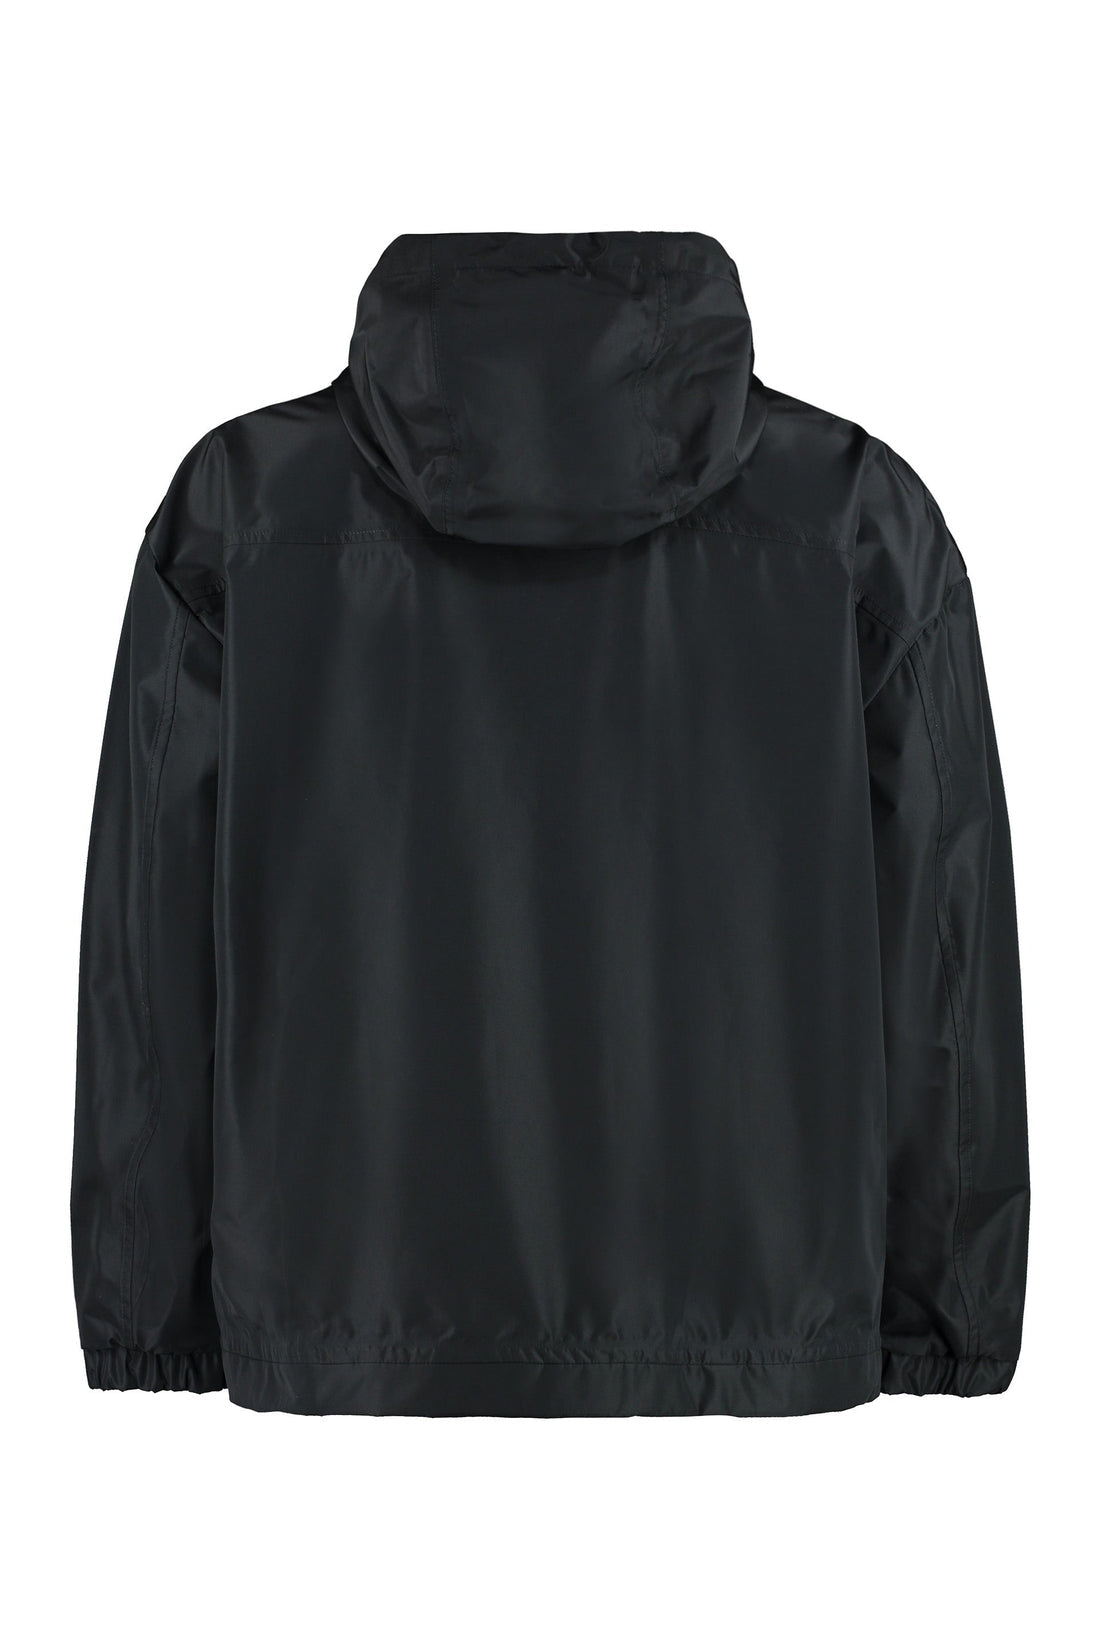 Dolce & Gabbana-OUTLET-SALE-Technical fabric hooded jacket-ARCHIVIST